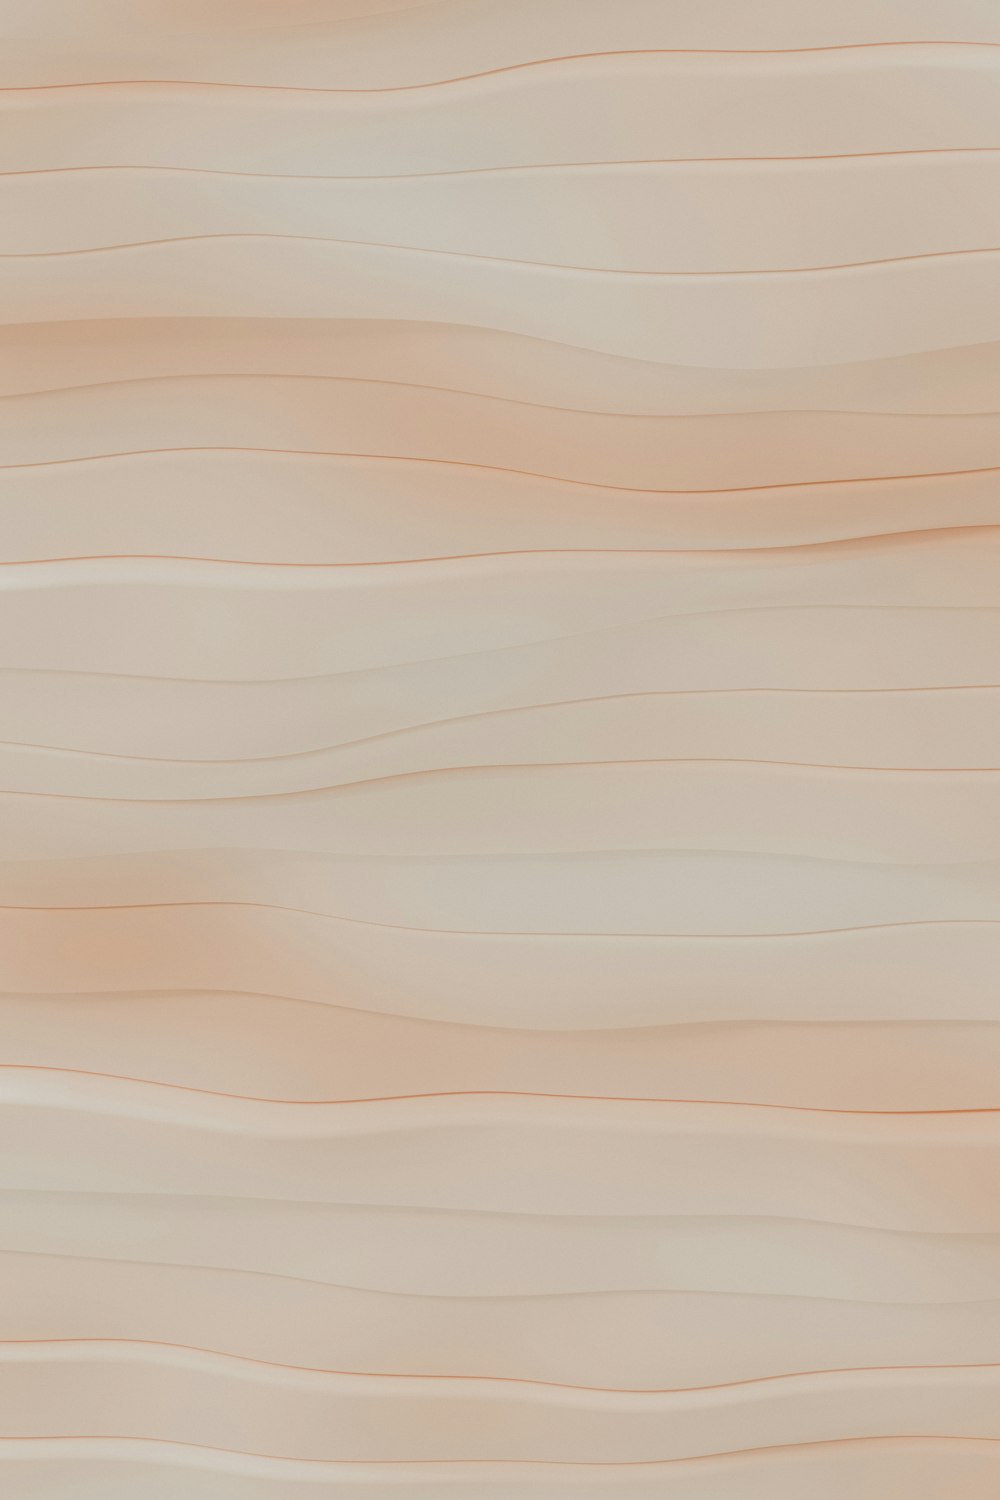 a wood texture background with a light brown color